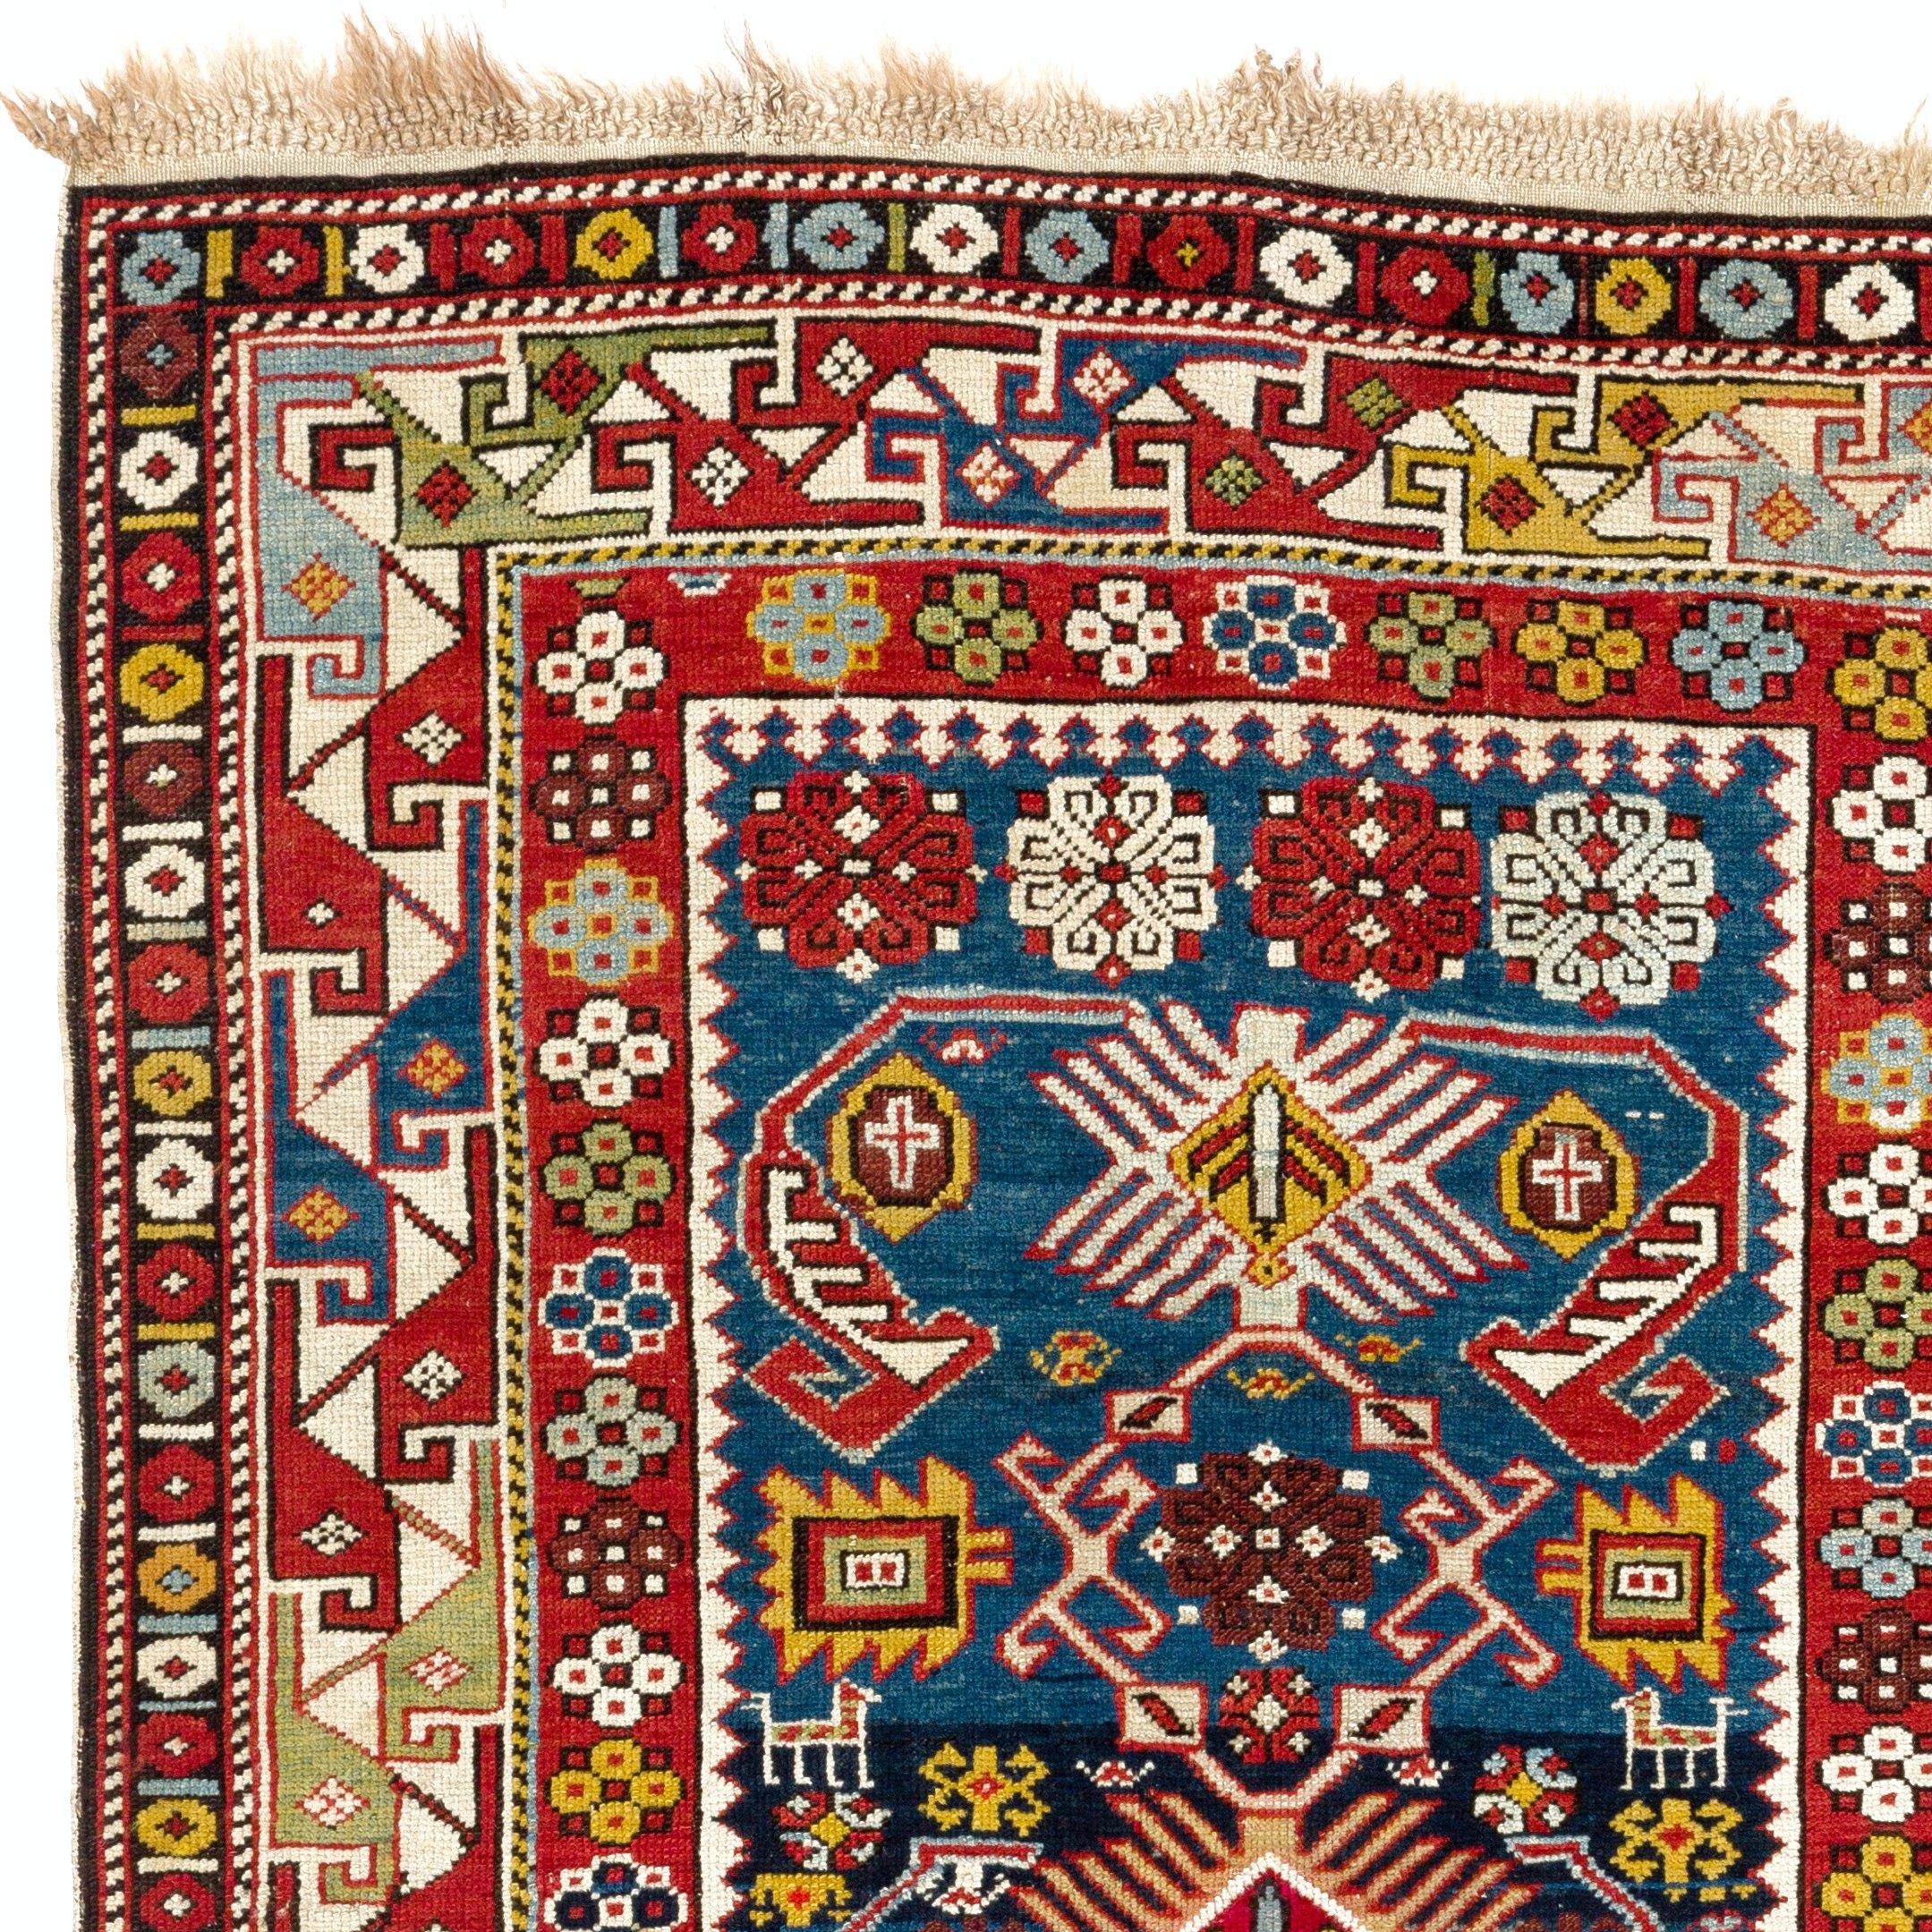 A dazzling antique Caucasian rug from Kuba district in the North East Azerbaijan with a pleasing 